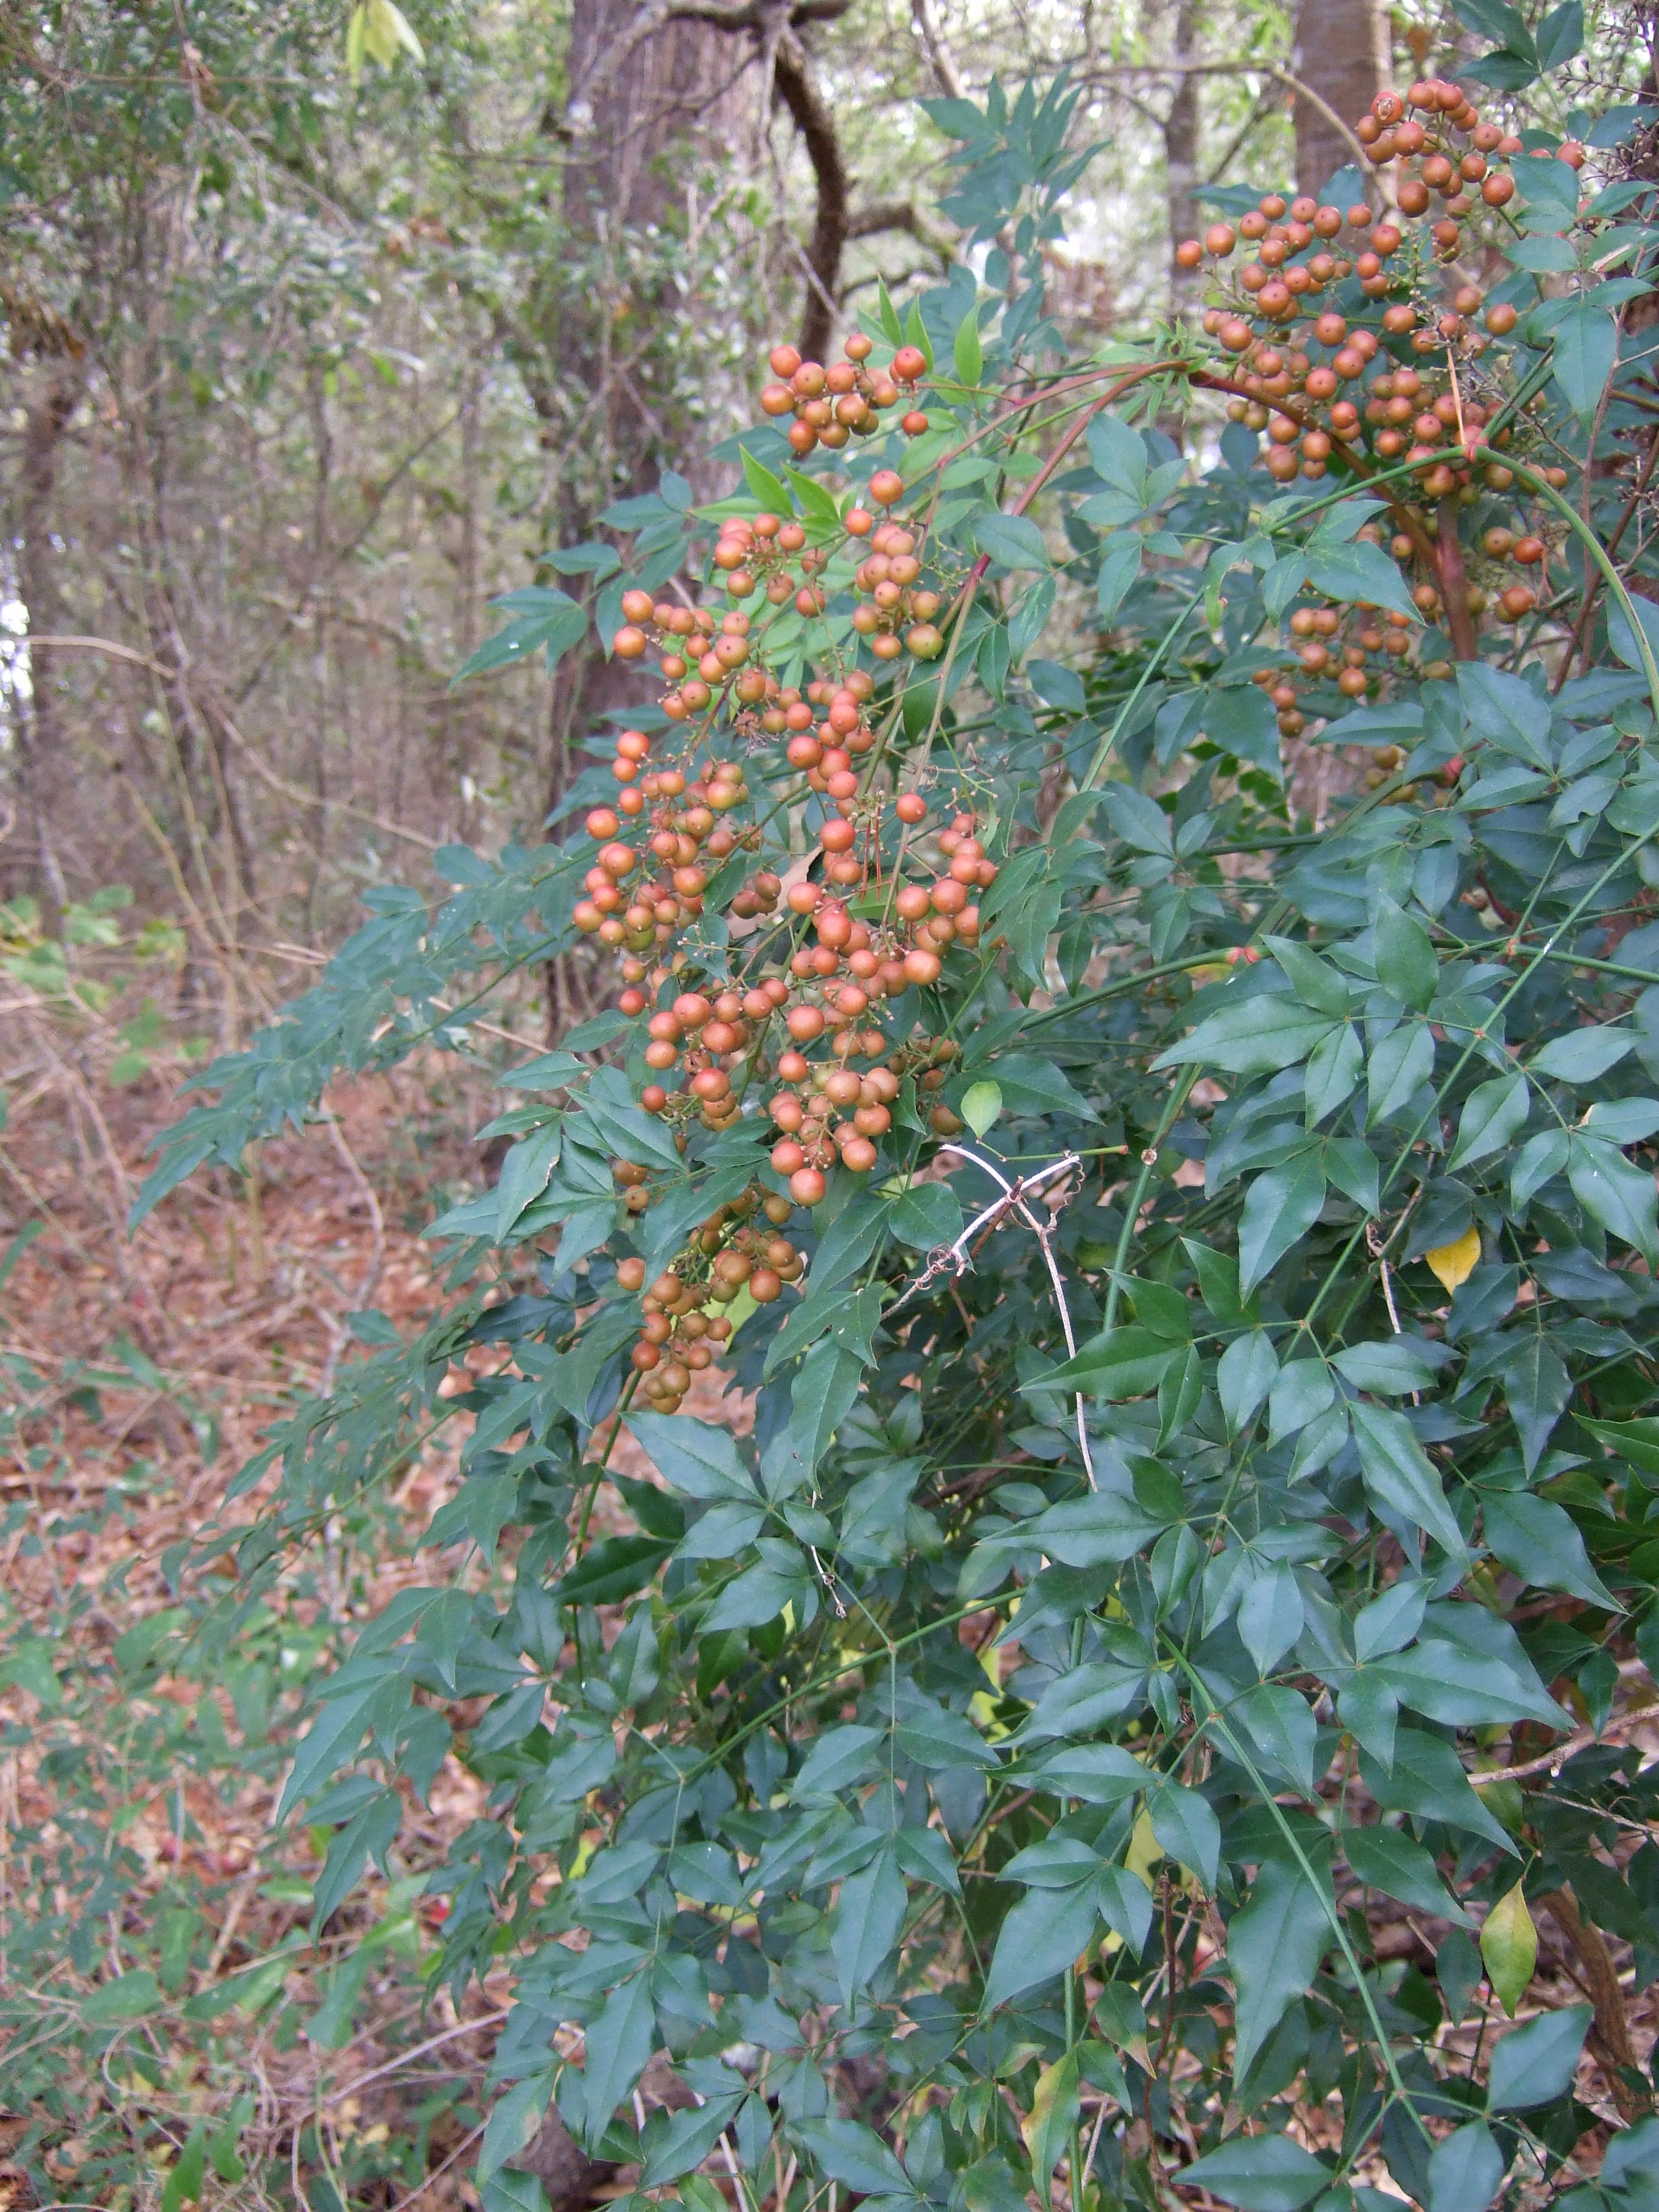 Habit and mature red fruits